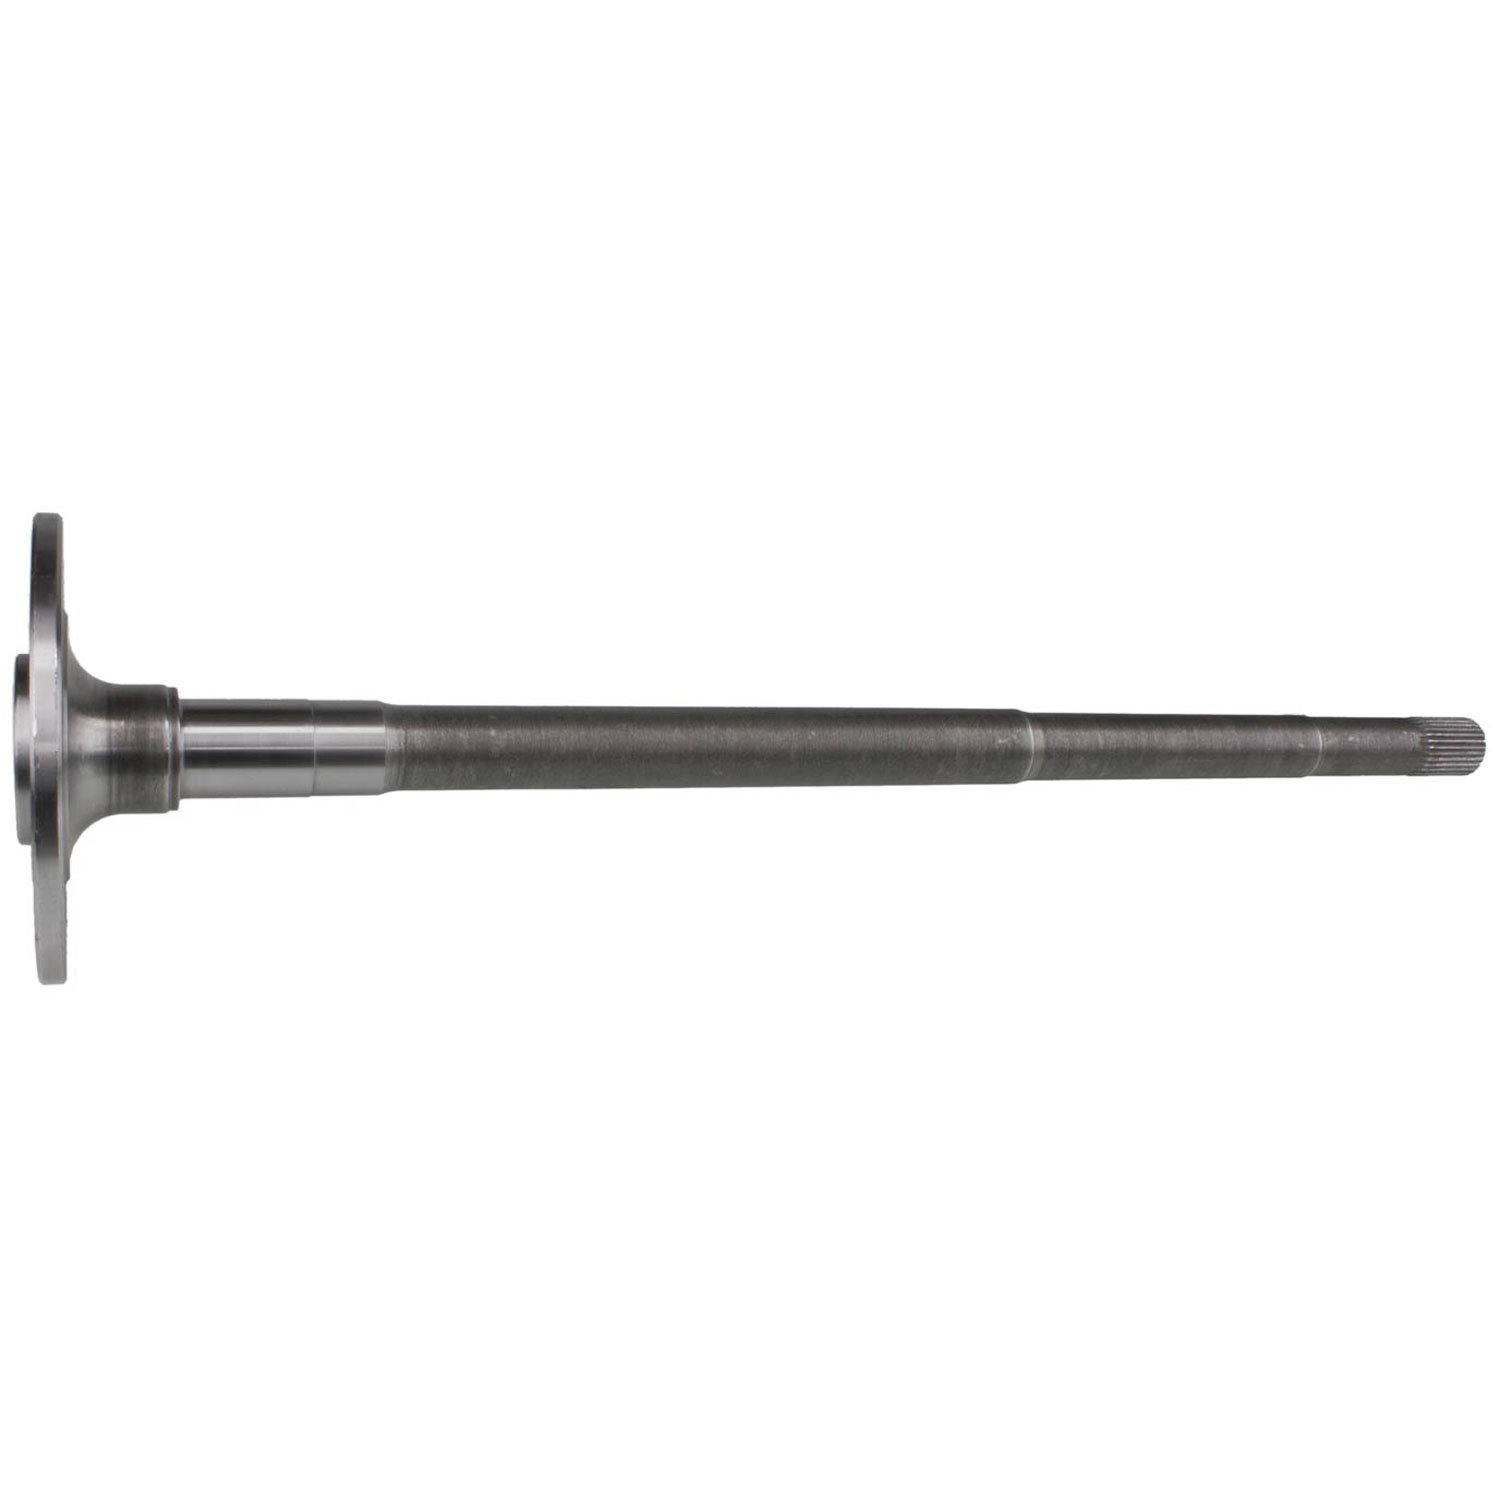 Axle Shaft Large Bearing 27.25 in. Overall Length 5 Lugs 28 Spline